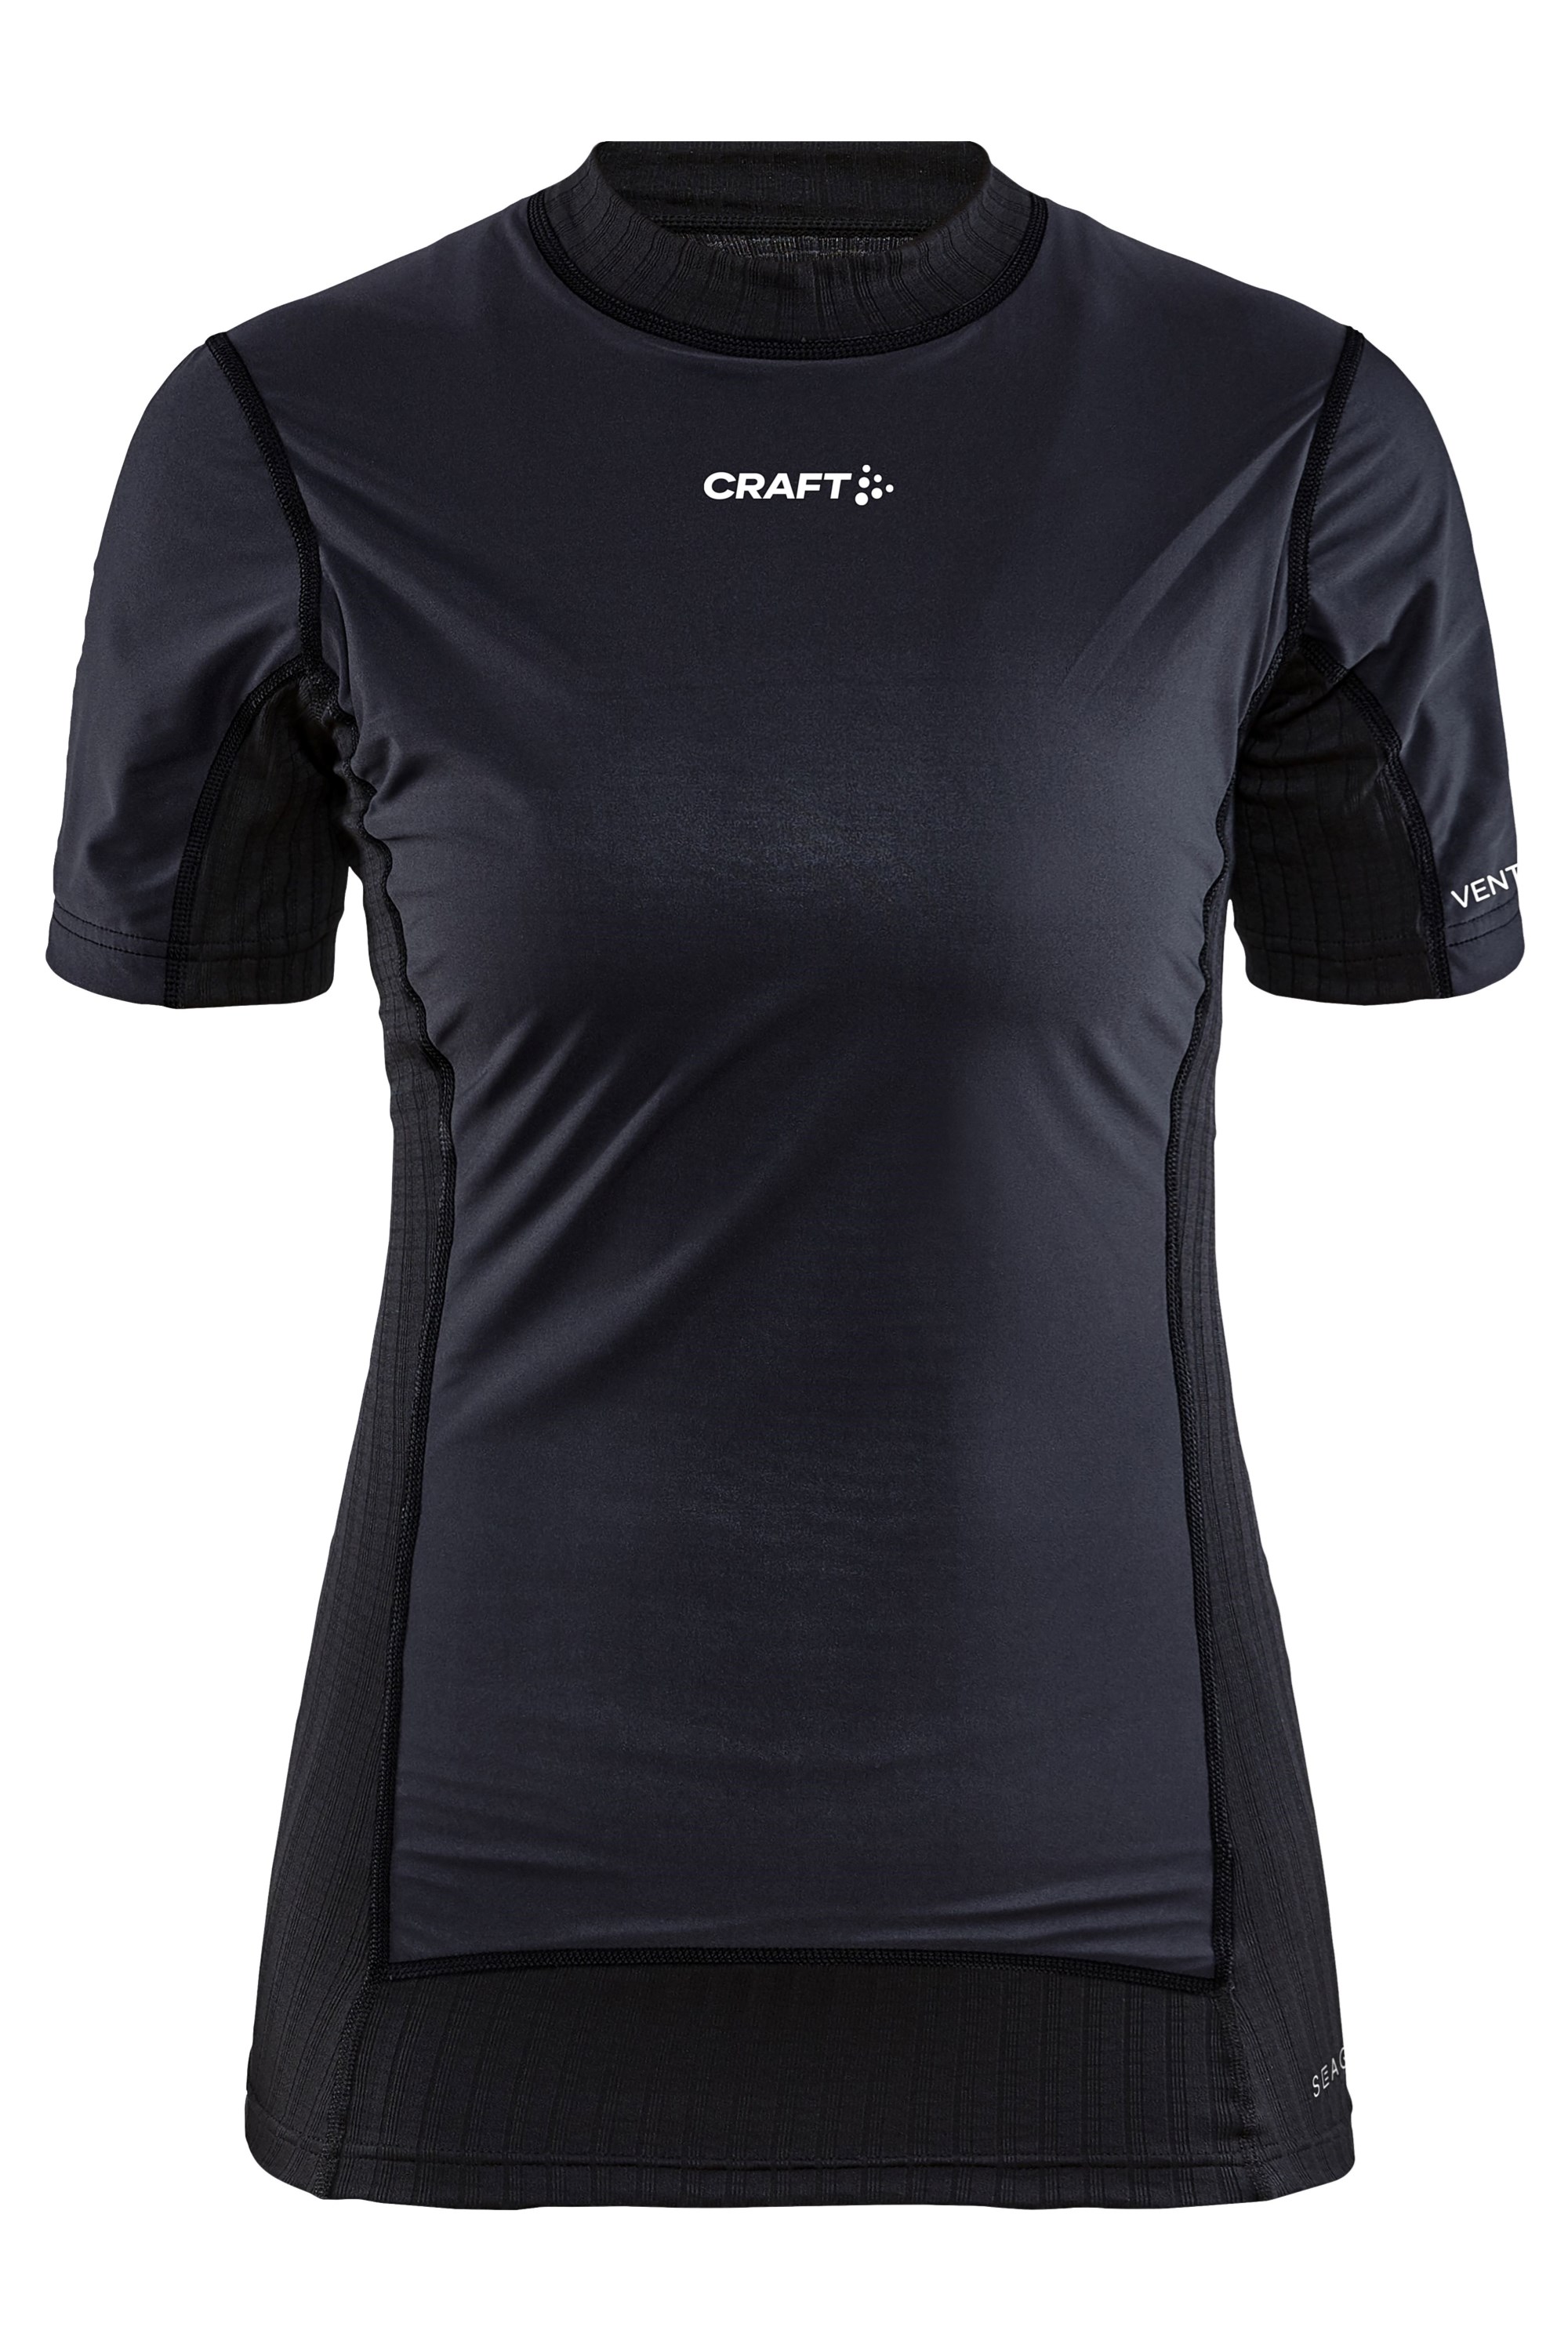 Active Extreme X Womens Wind Stopper Baselayer Top -